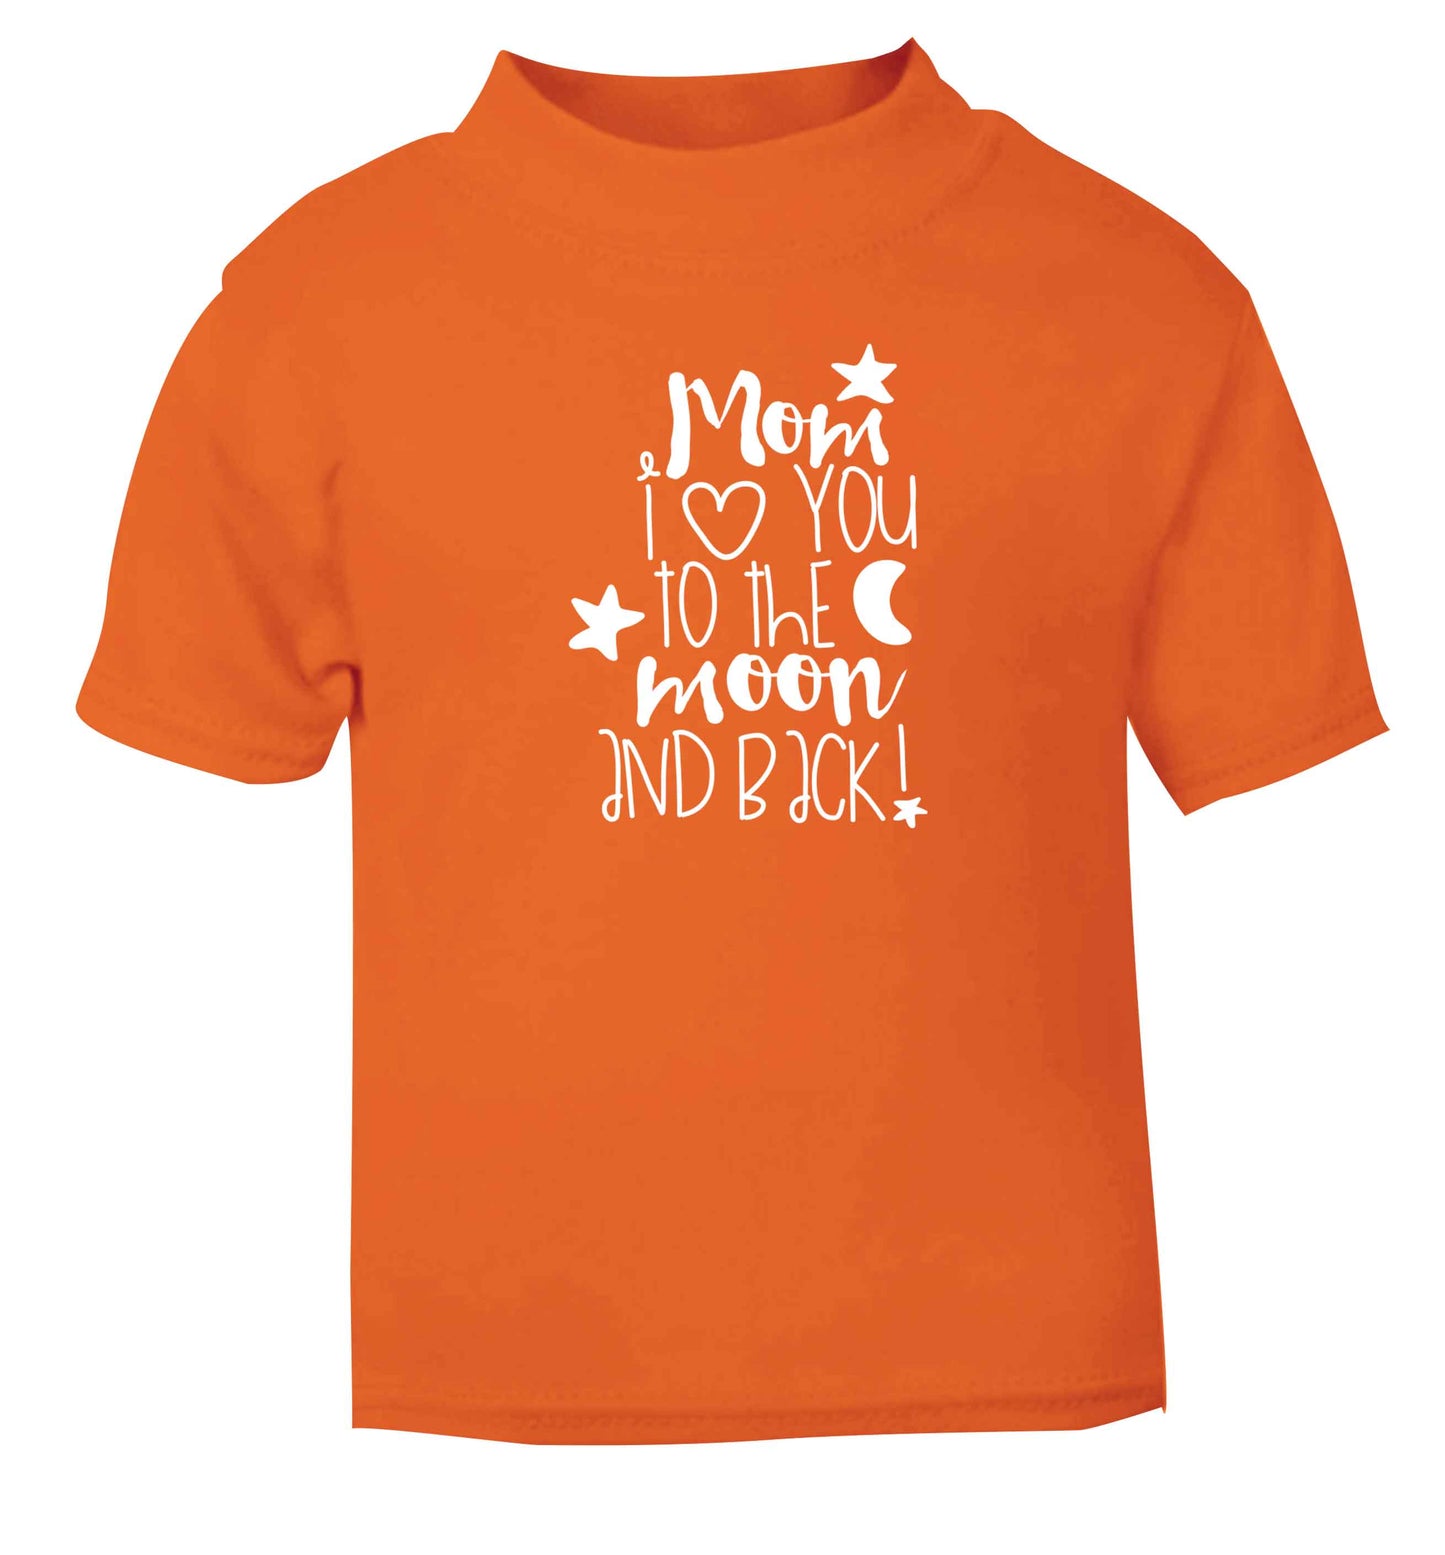 Mom I love you to the moon and back orange baby toddler Tshirt 2 Years